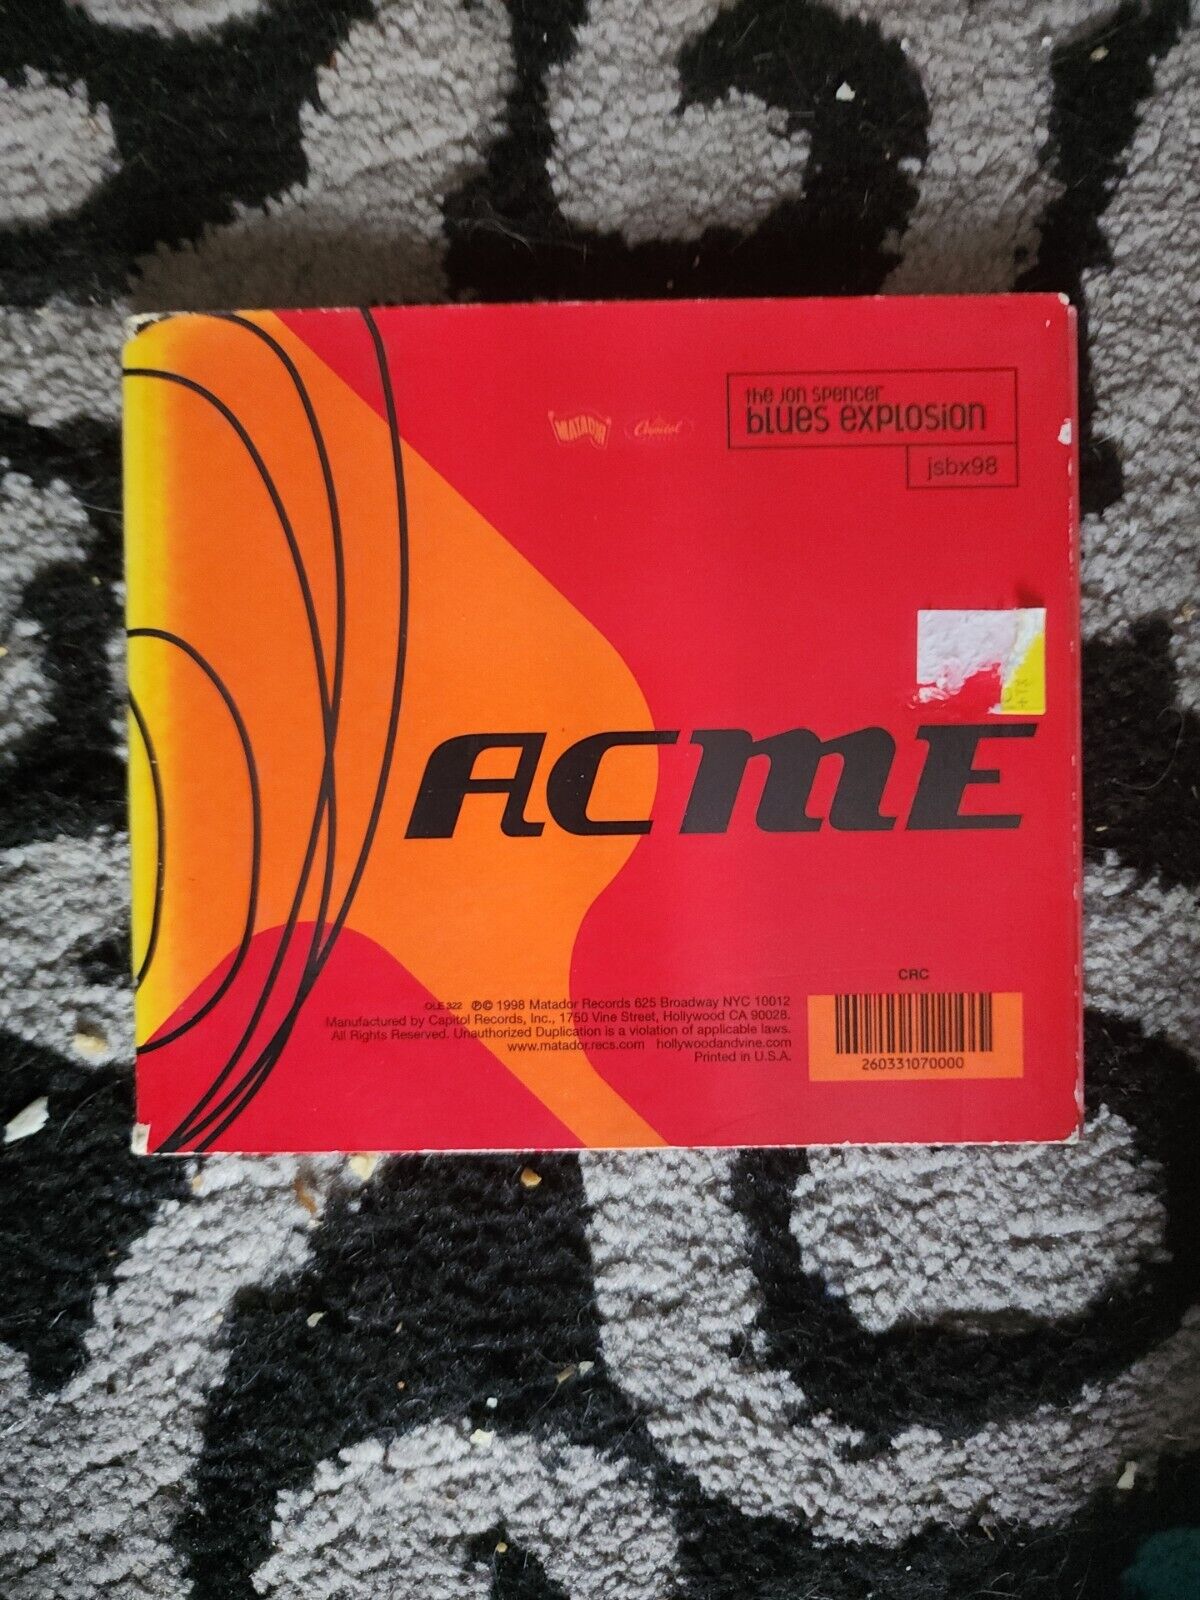 Acme by The Jon Spencer Blues Explosion (CD, Oct-1998, Matador (record label))